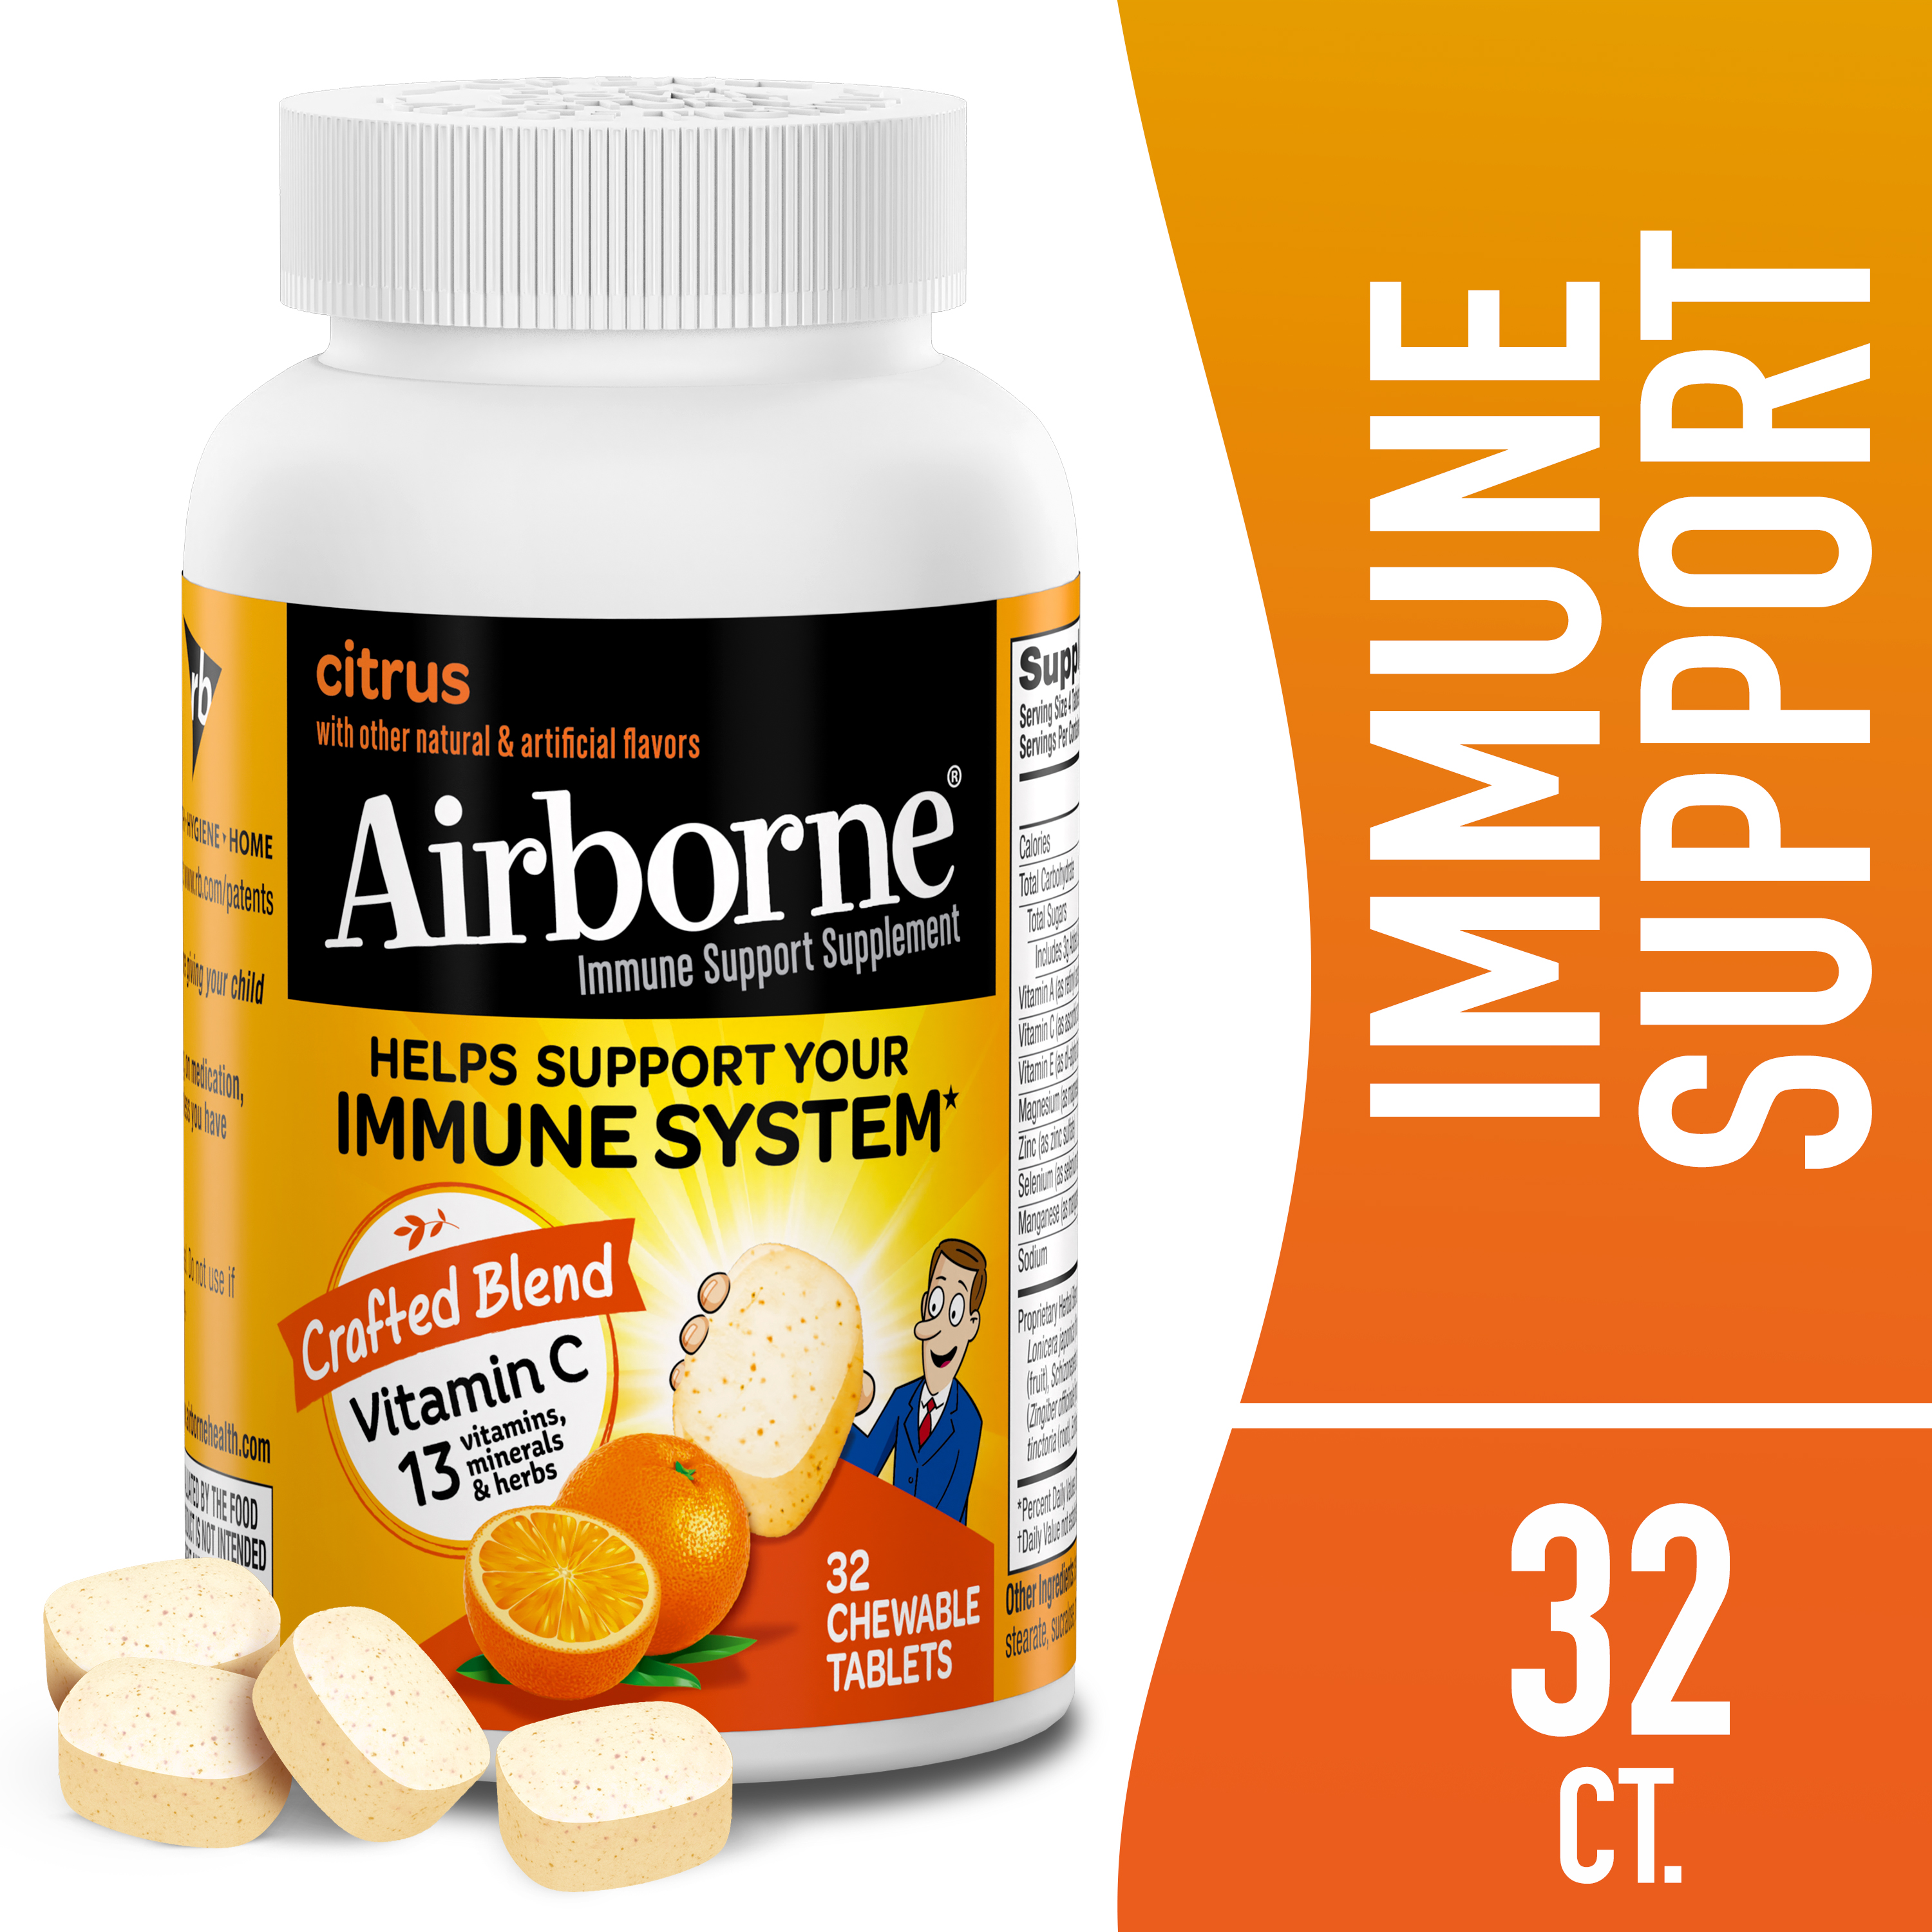 Airborne 1000mg Vitamin C Immune Support Effervescent Tablets, Citrus Flavor, 32 Count - image 1 of 7